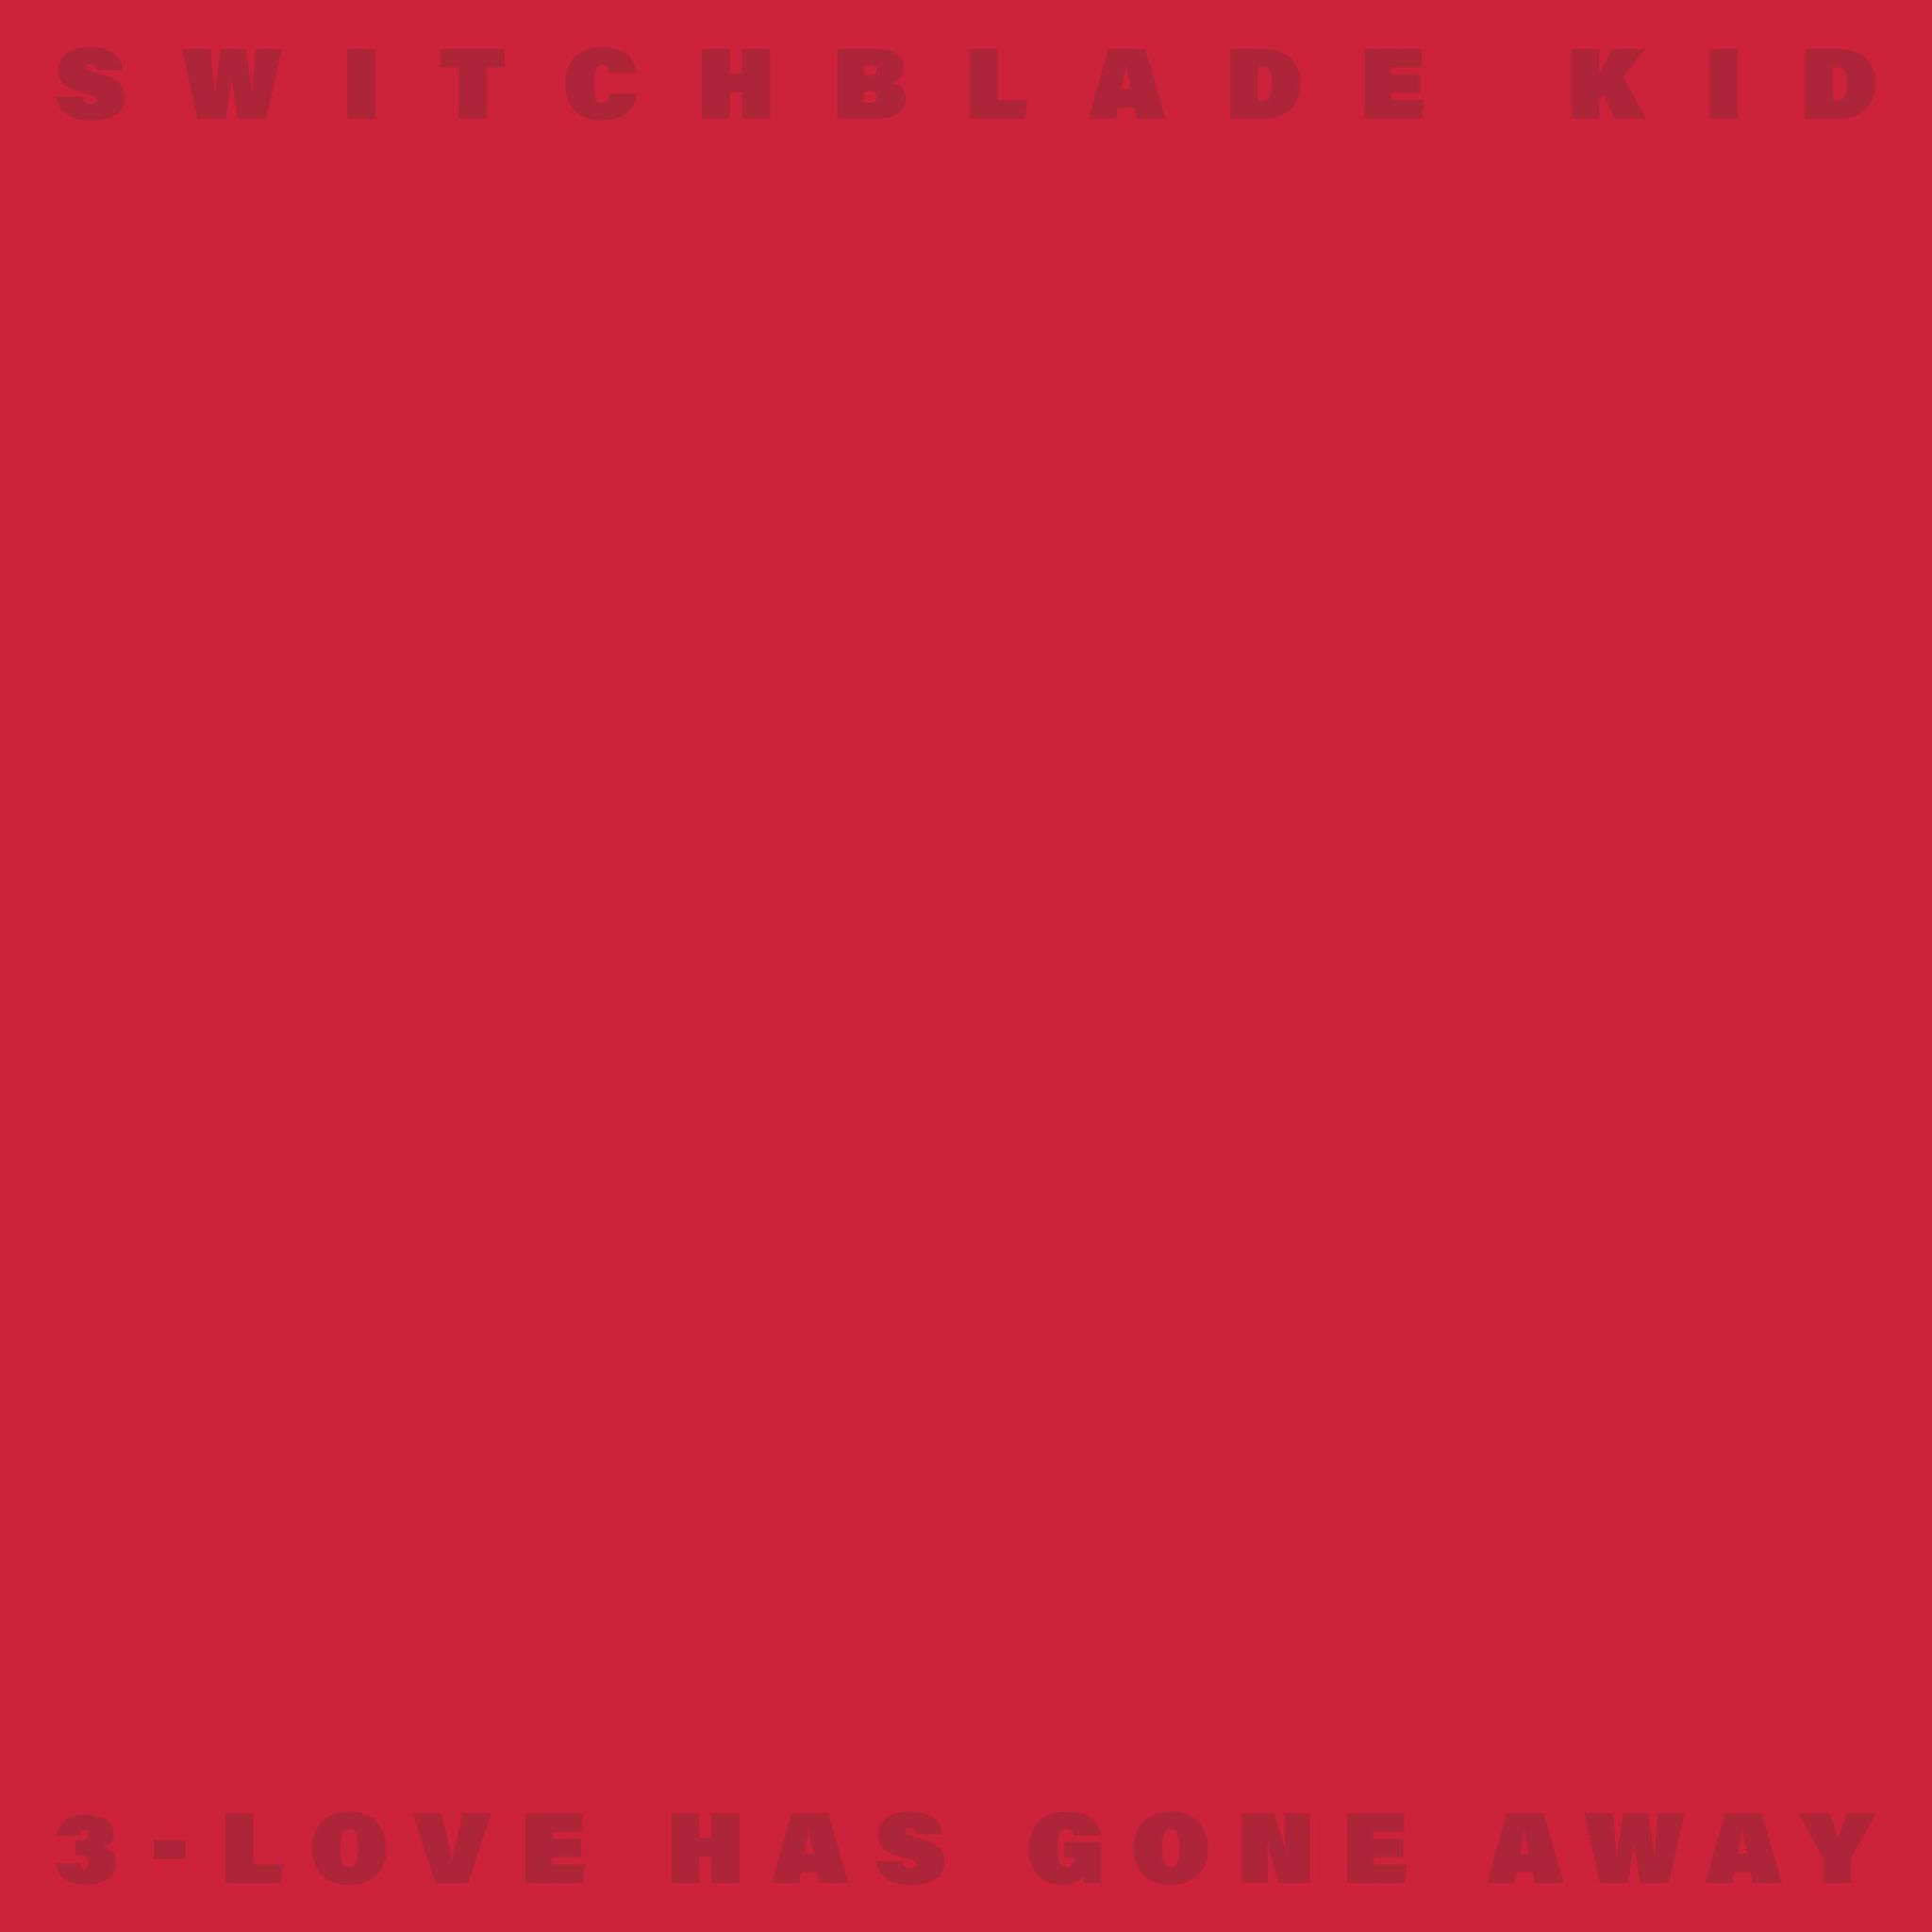 Switchblade Kid: 3-Love Has Gone Away - Thanks I Hate It Records